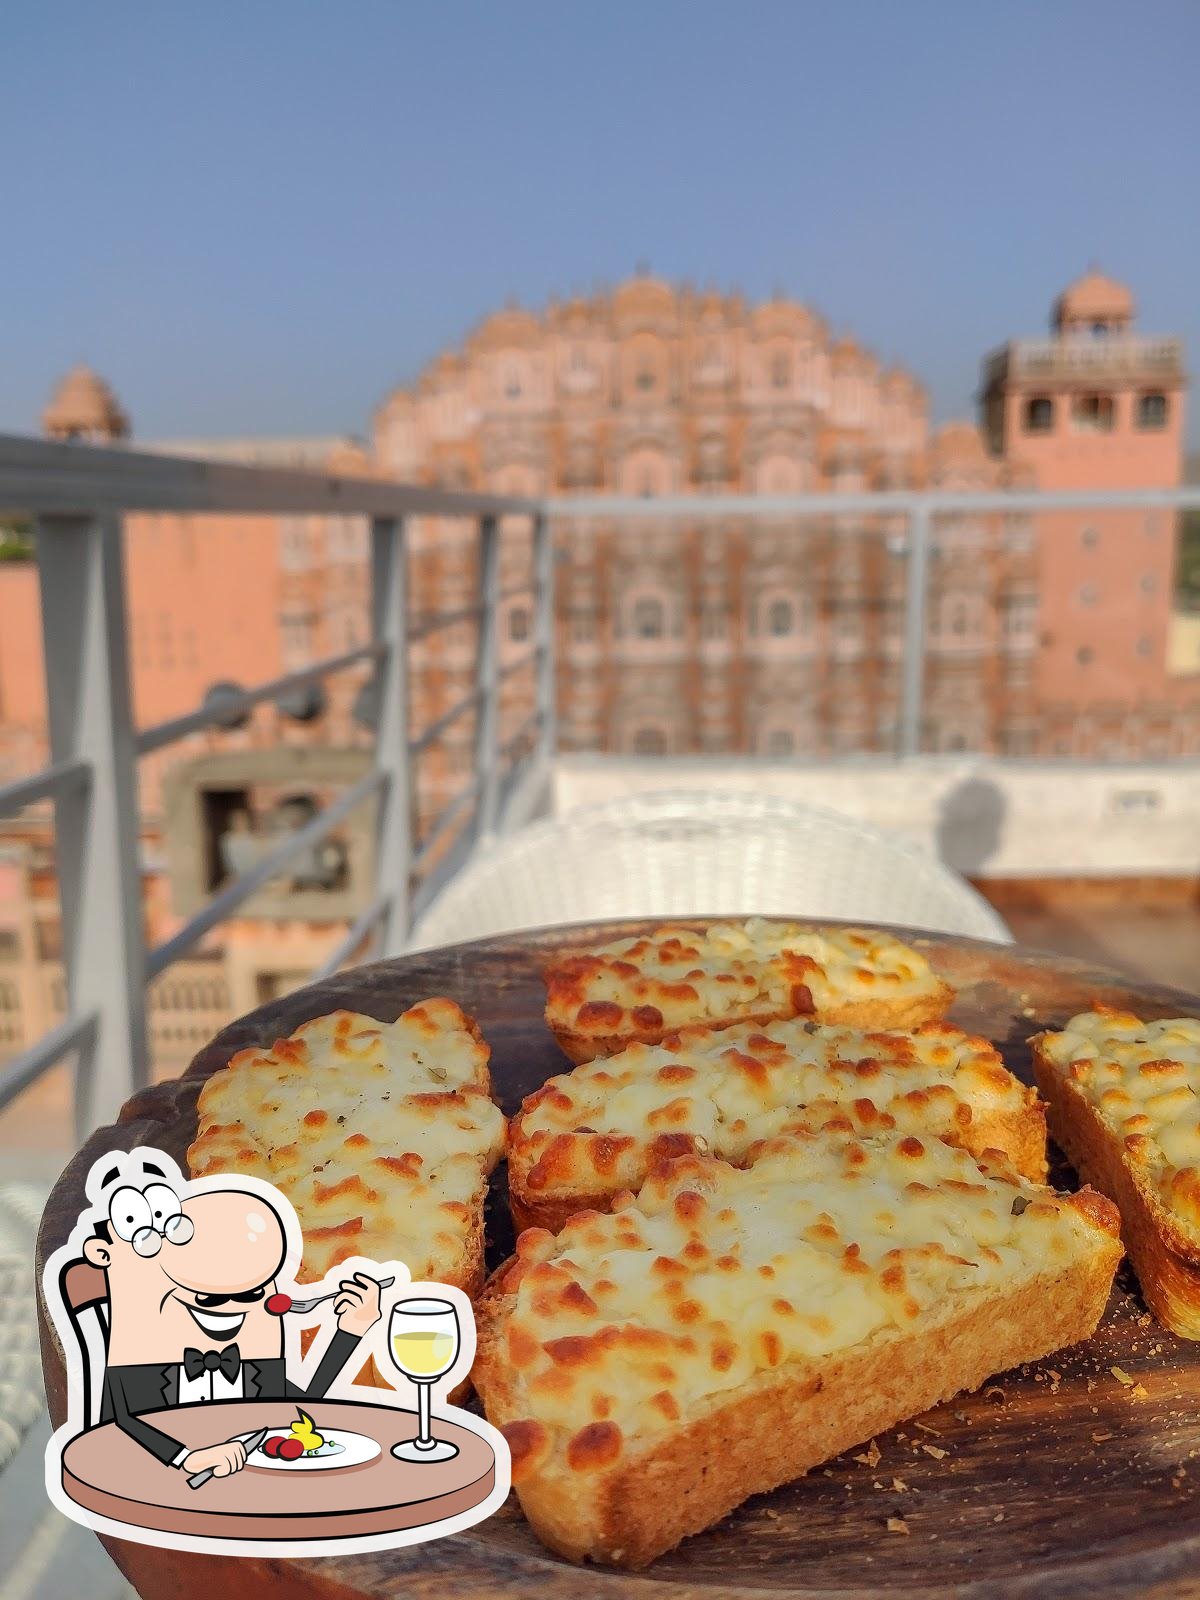 जयपर क शन हव महल Wind view cafe and the Tattoo Cafe Jaipur In front of  Hawamahal   YouTube